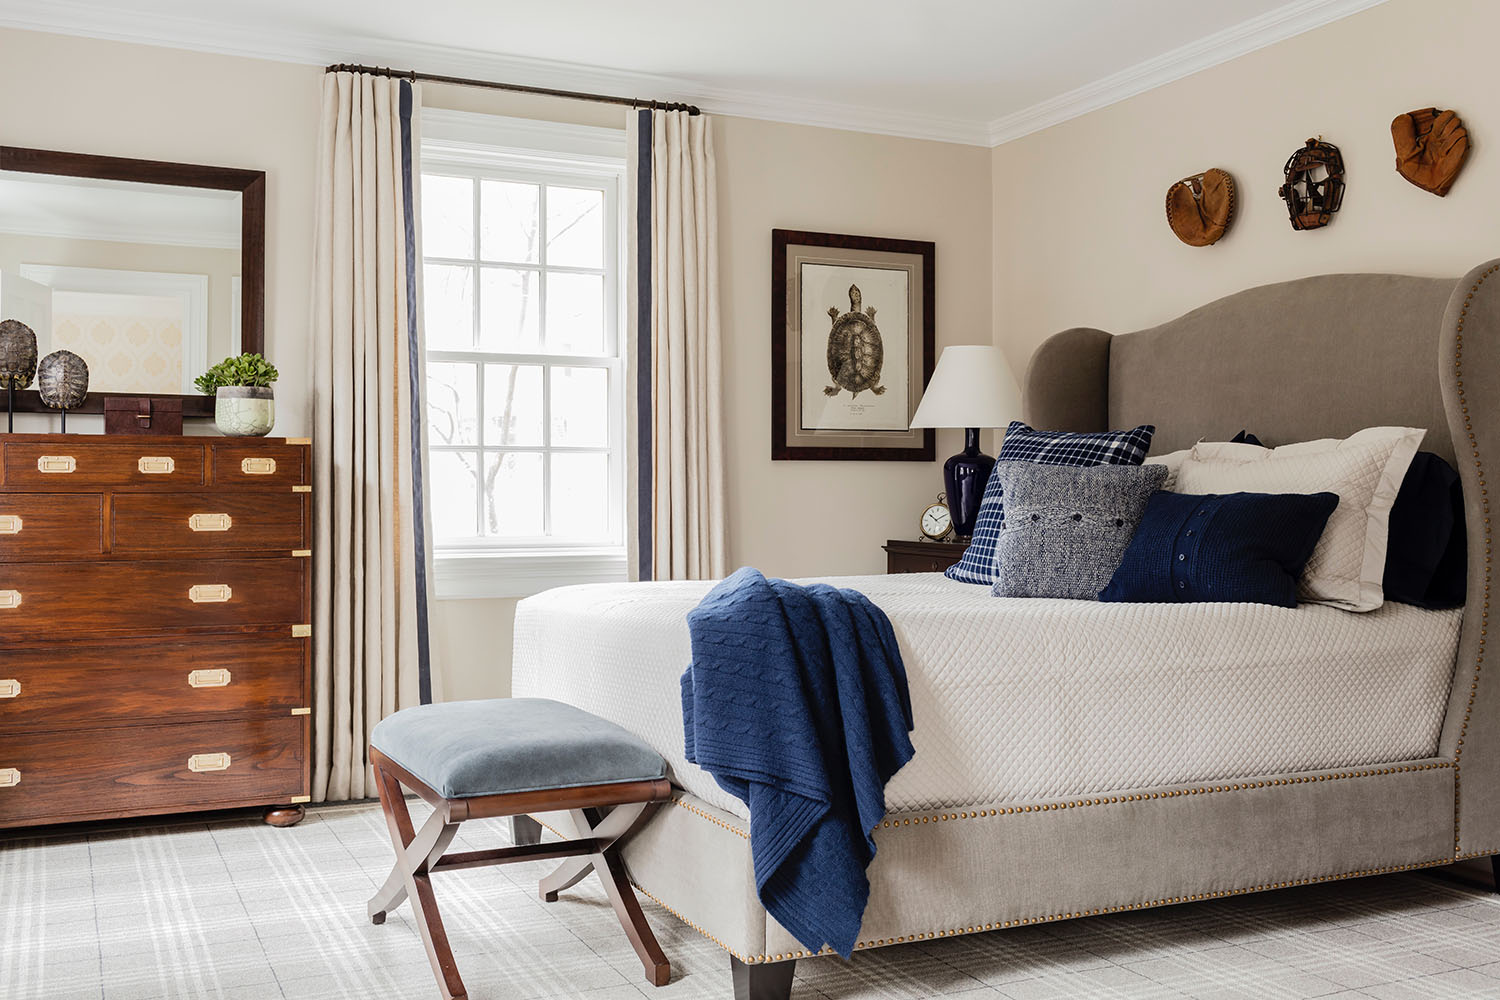 Interior Design by Theo & Isabella Design Group  For the college-aged son in the same family, those same ties to the Carolinas are expressed differently, and evoked by the turtle shells exhibited on the dresser and in the print on the wall. The shells wer